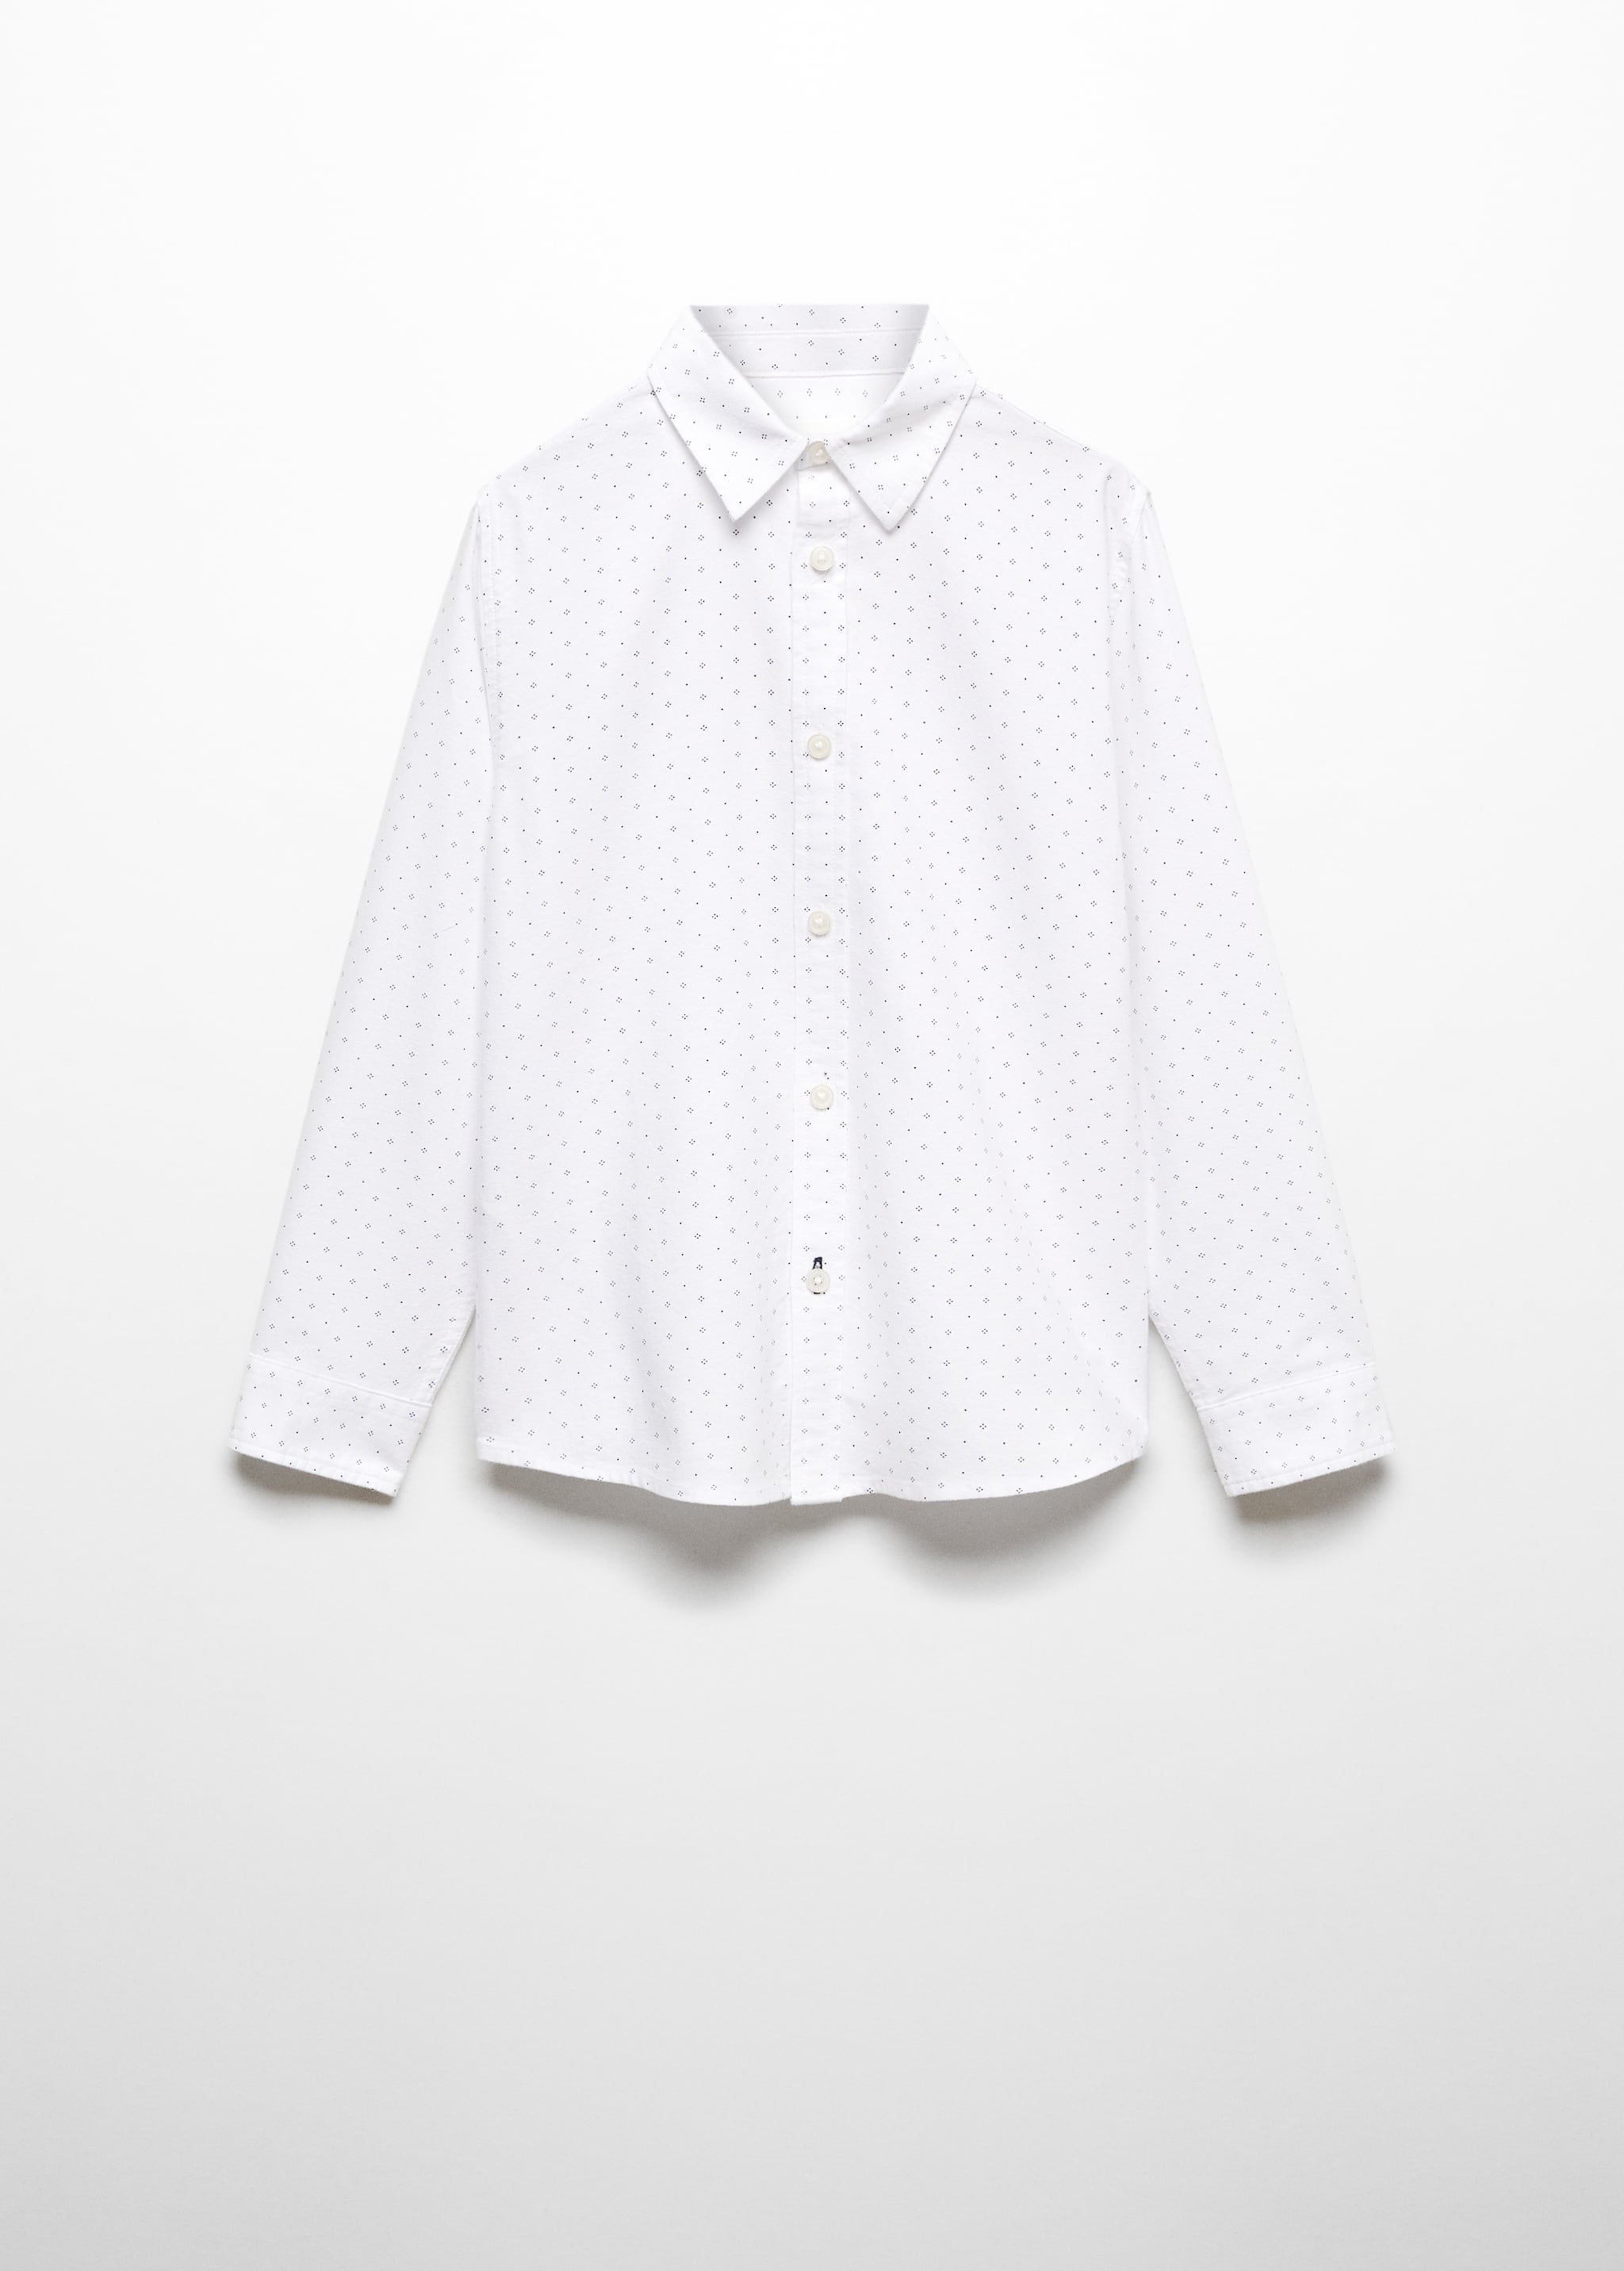 Printed Oxford shirt - Article without model